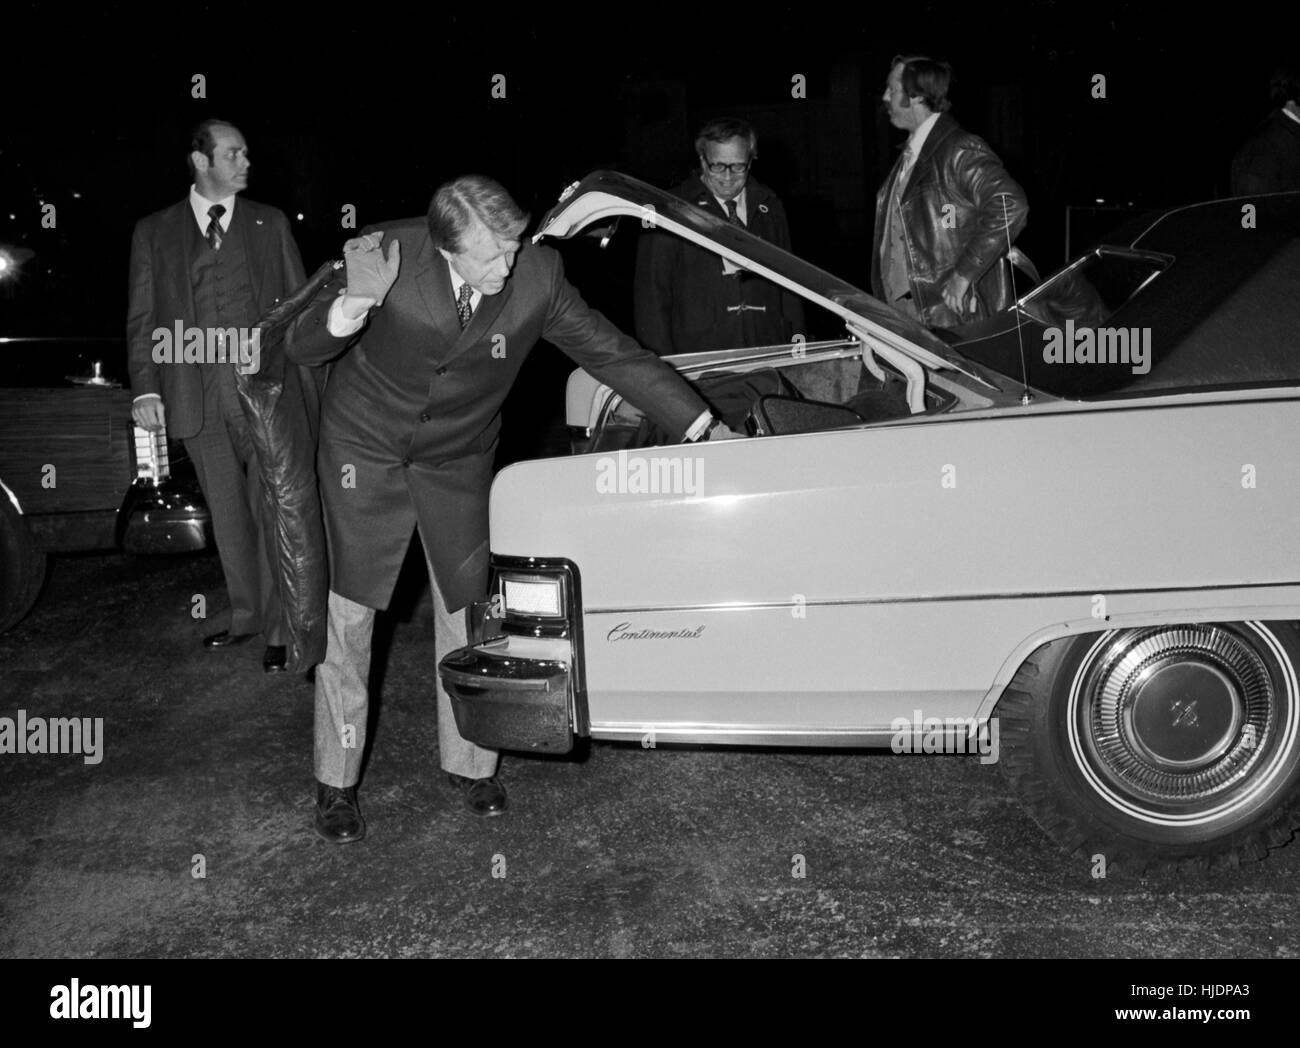 1976 Democratic presidential candidate Georgia governor Jimmy Carter - on the campaign trail - gets his luggage from a car during a campaign swing in Illinois. Stock Photo